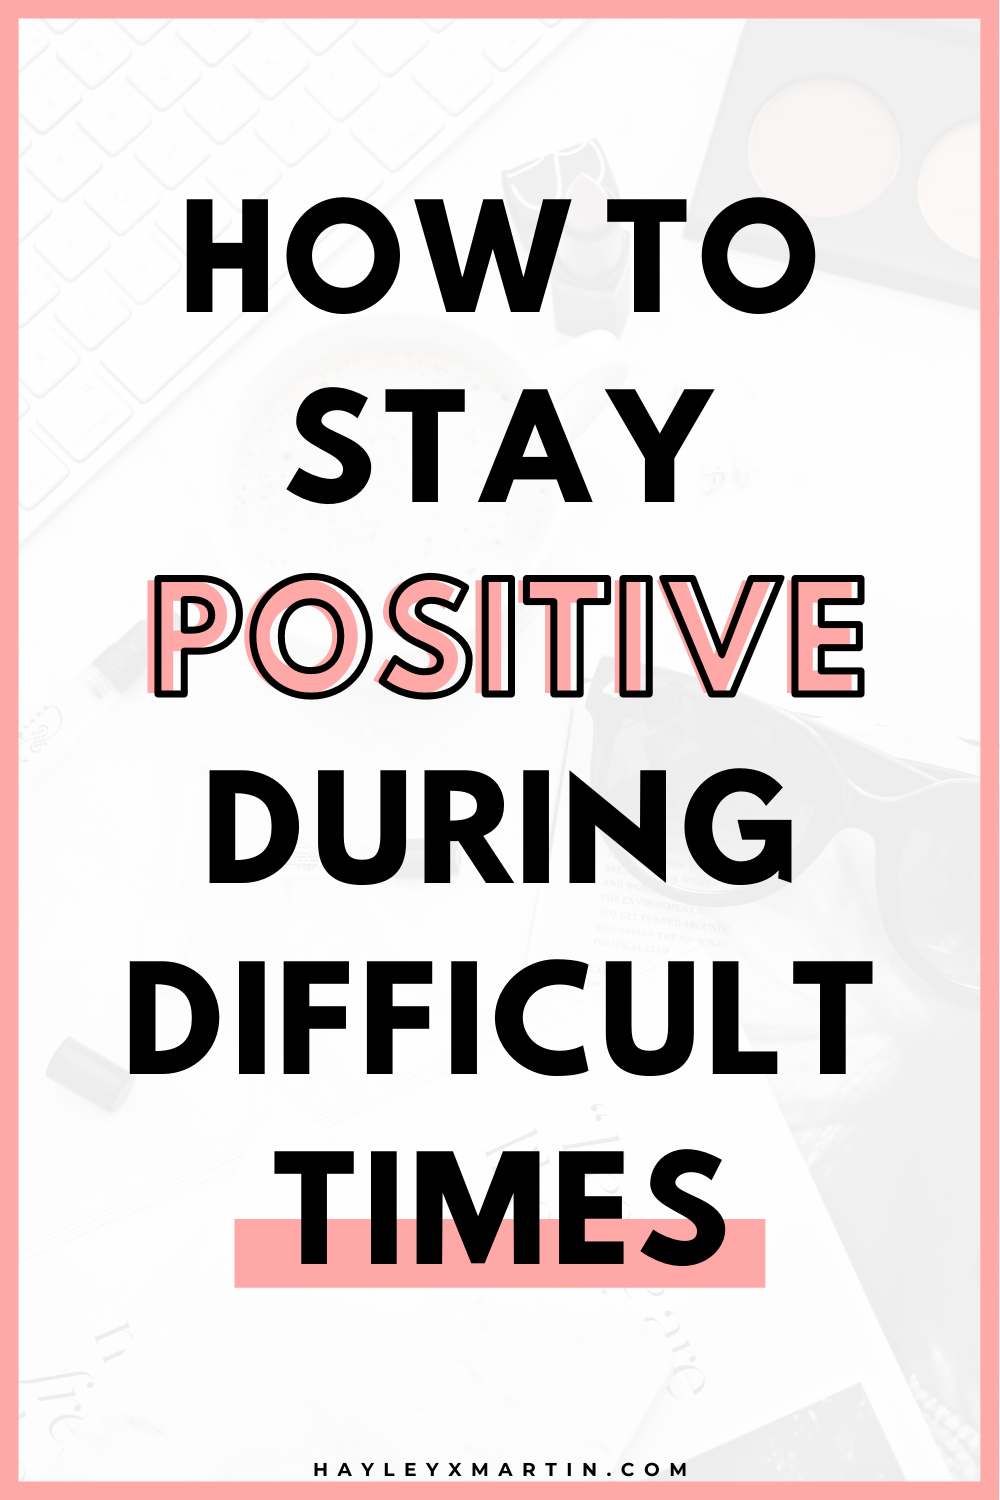 HOW TO STAY POSITIVE DURING DIFFICULT TIMES | HAYLEYXMARTIN